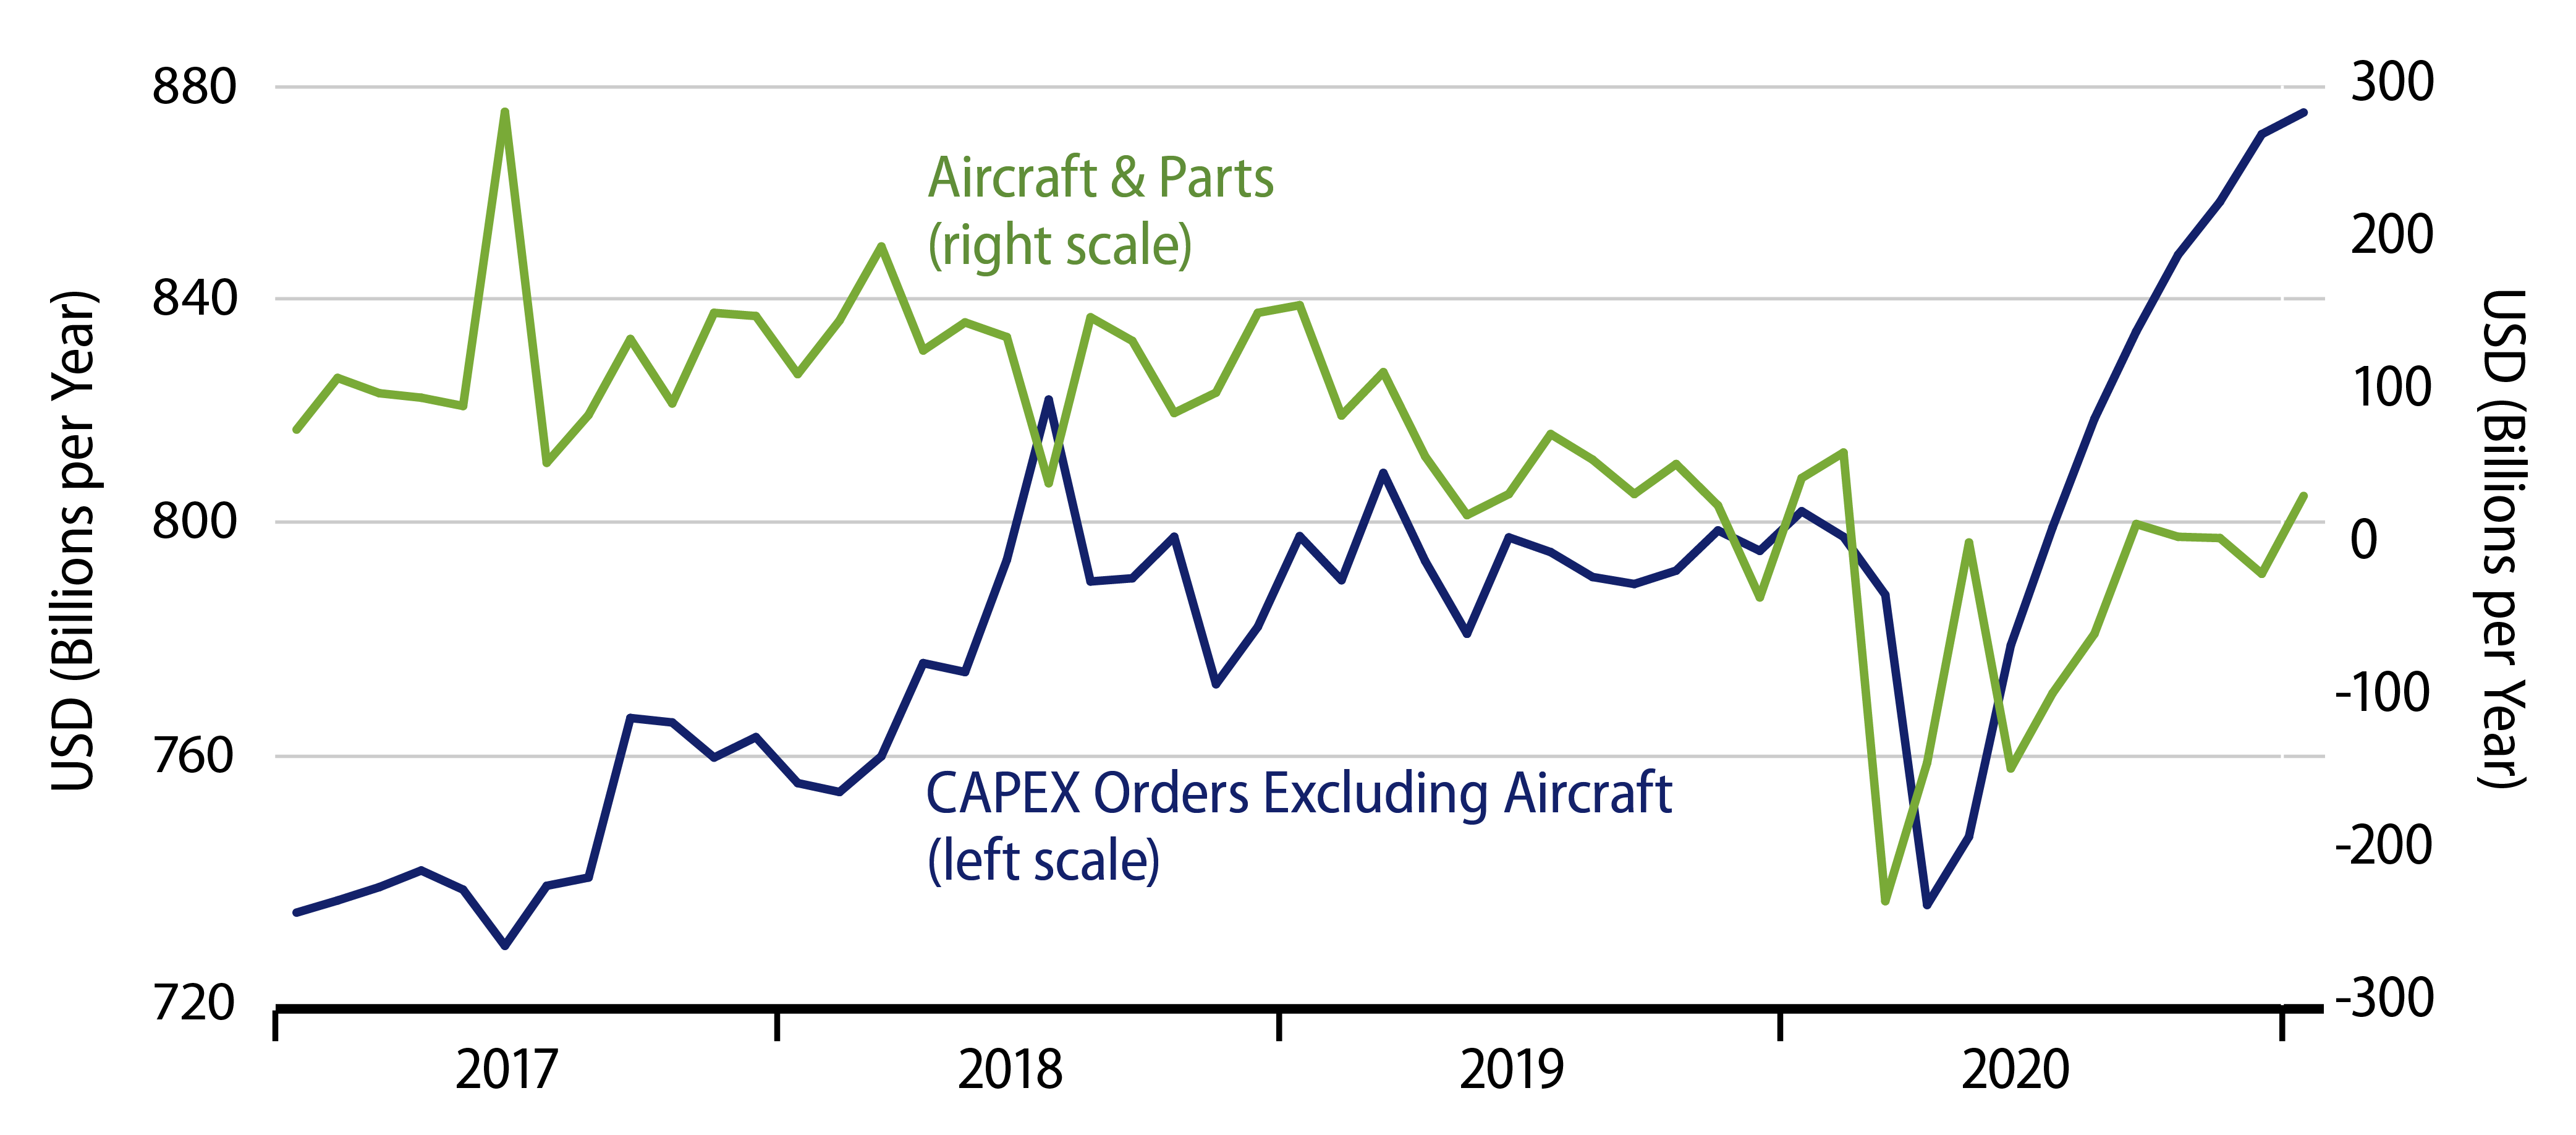 Explore Orders for Nondefense Capital Goods.